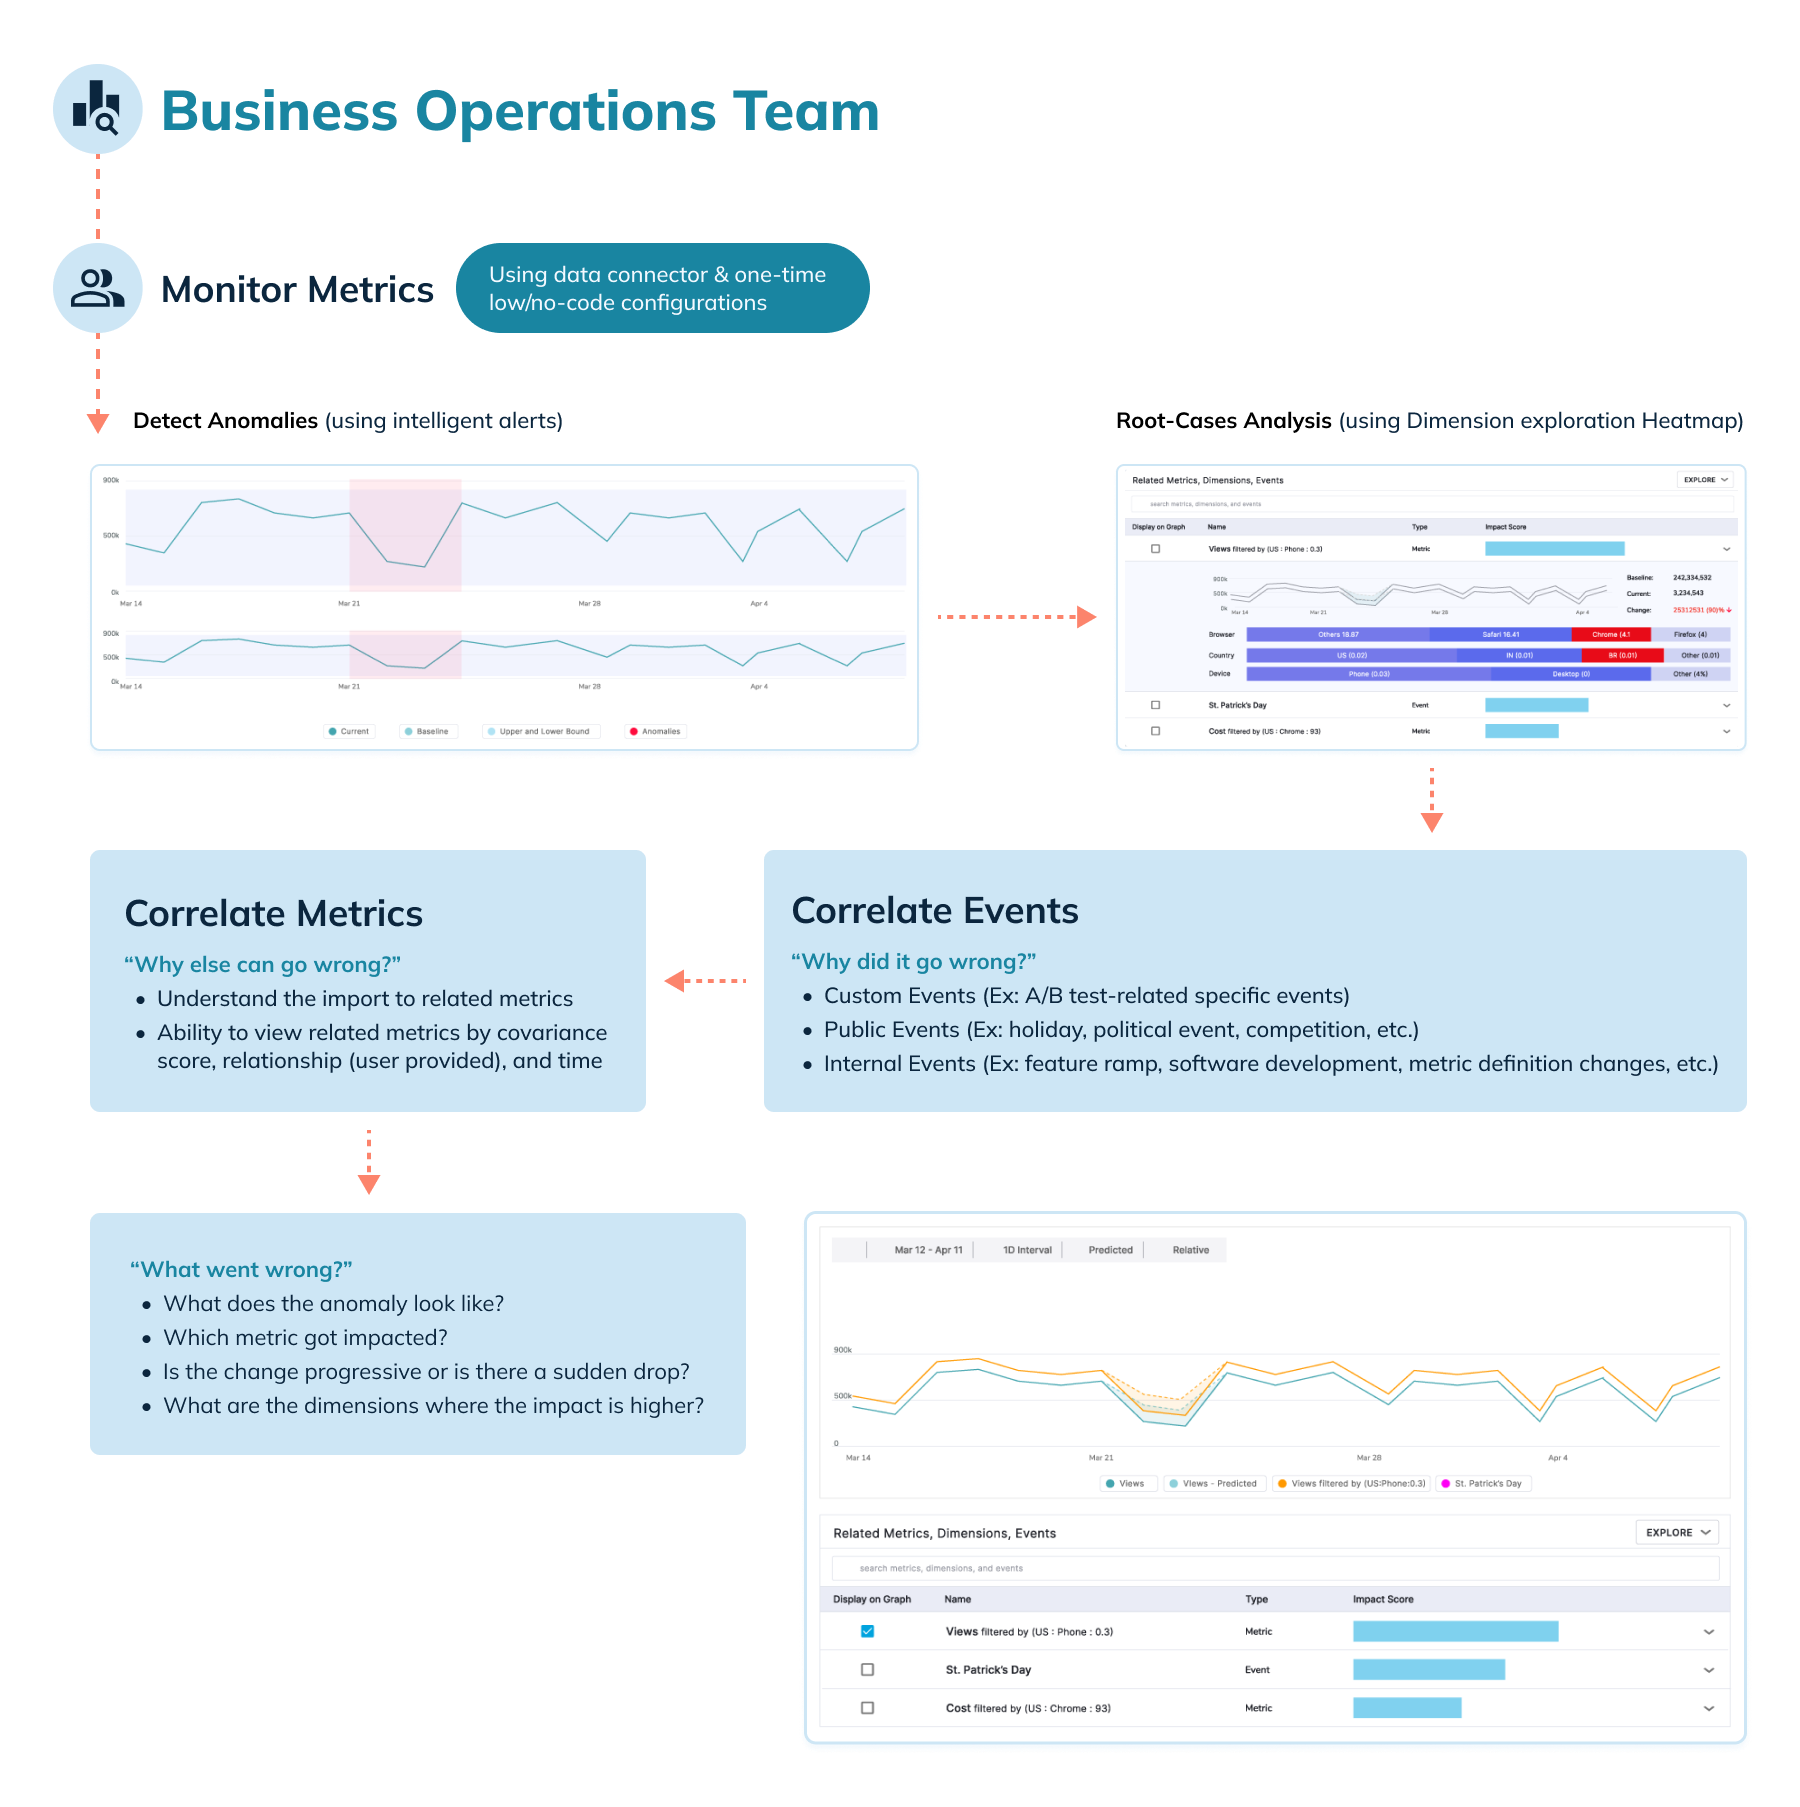 StarTree Thirdeye helping business operations teams monitor KPIs and perform root-cause analysis